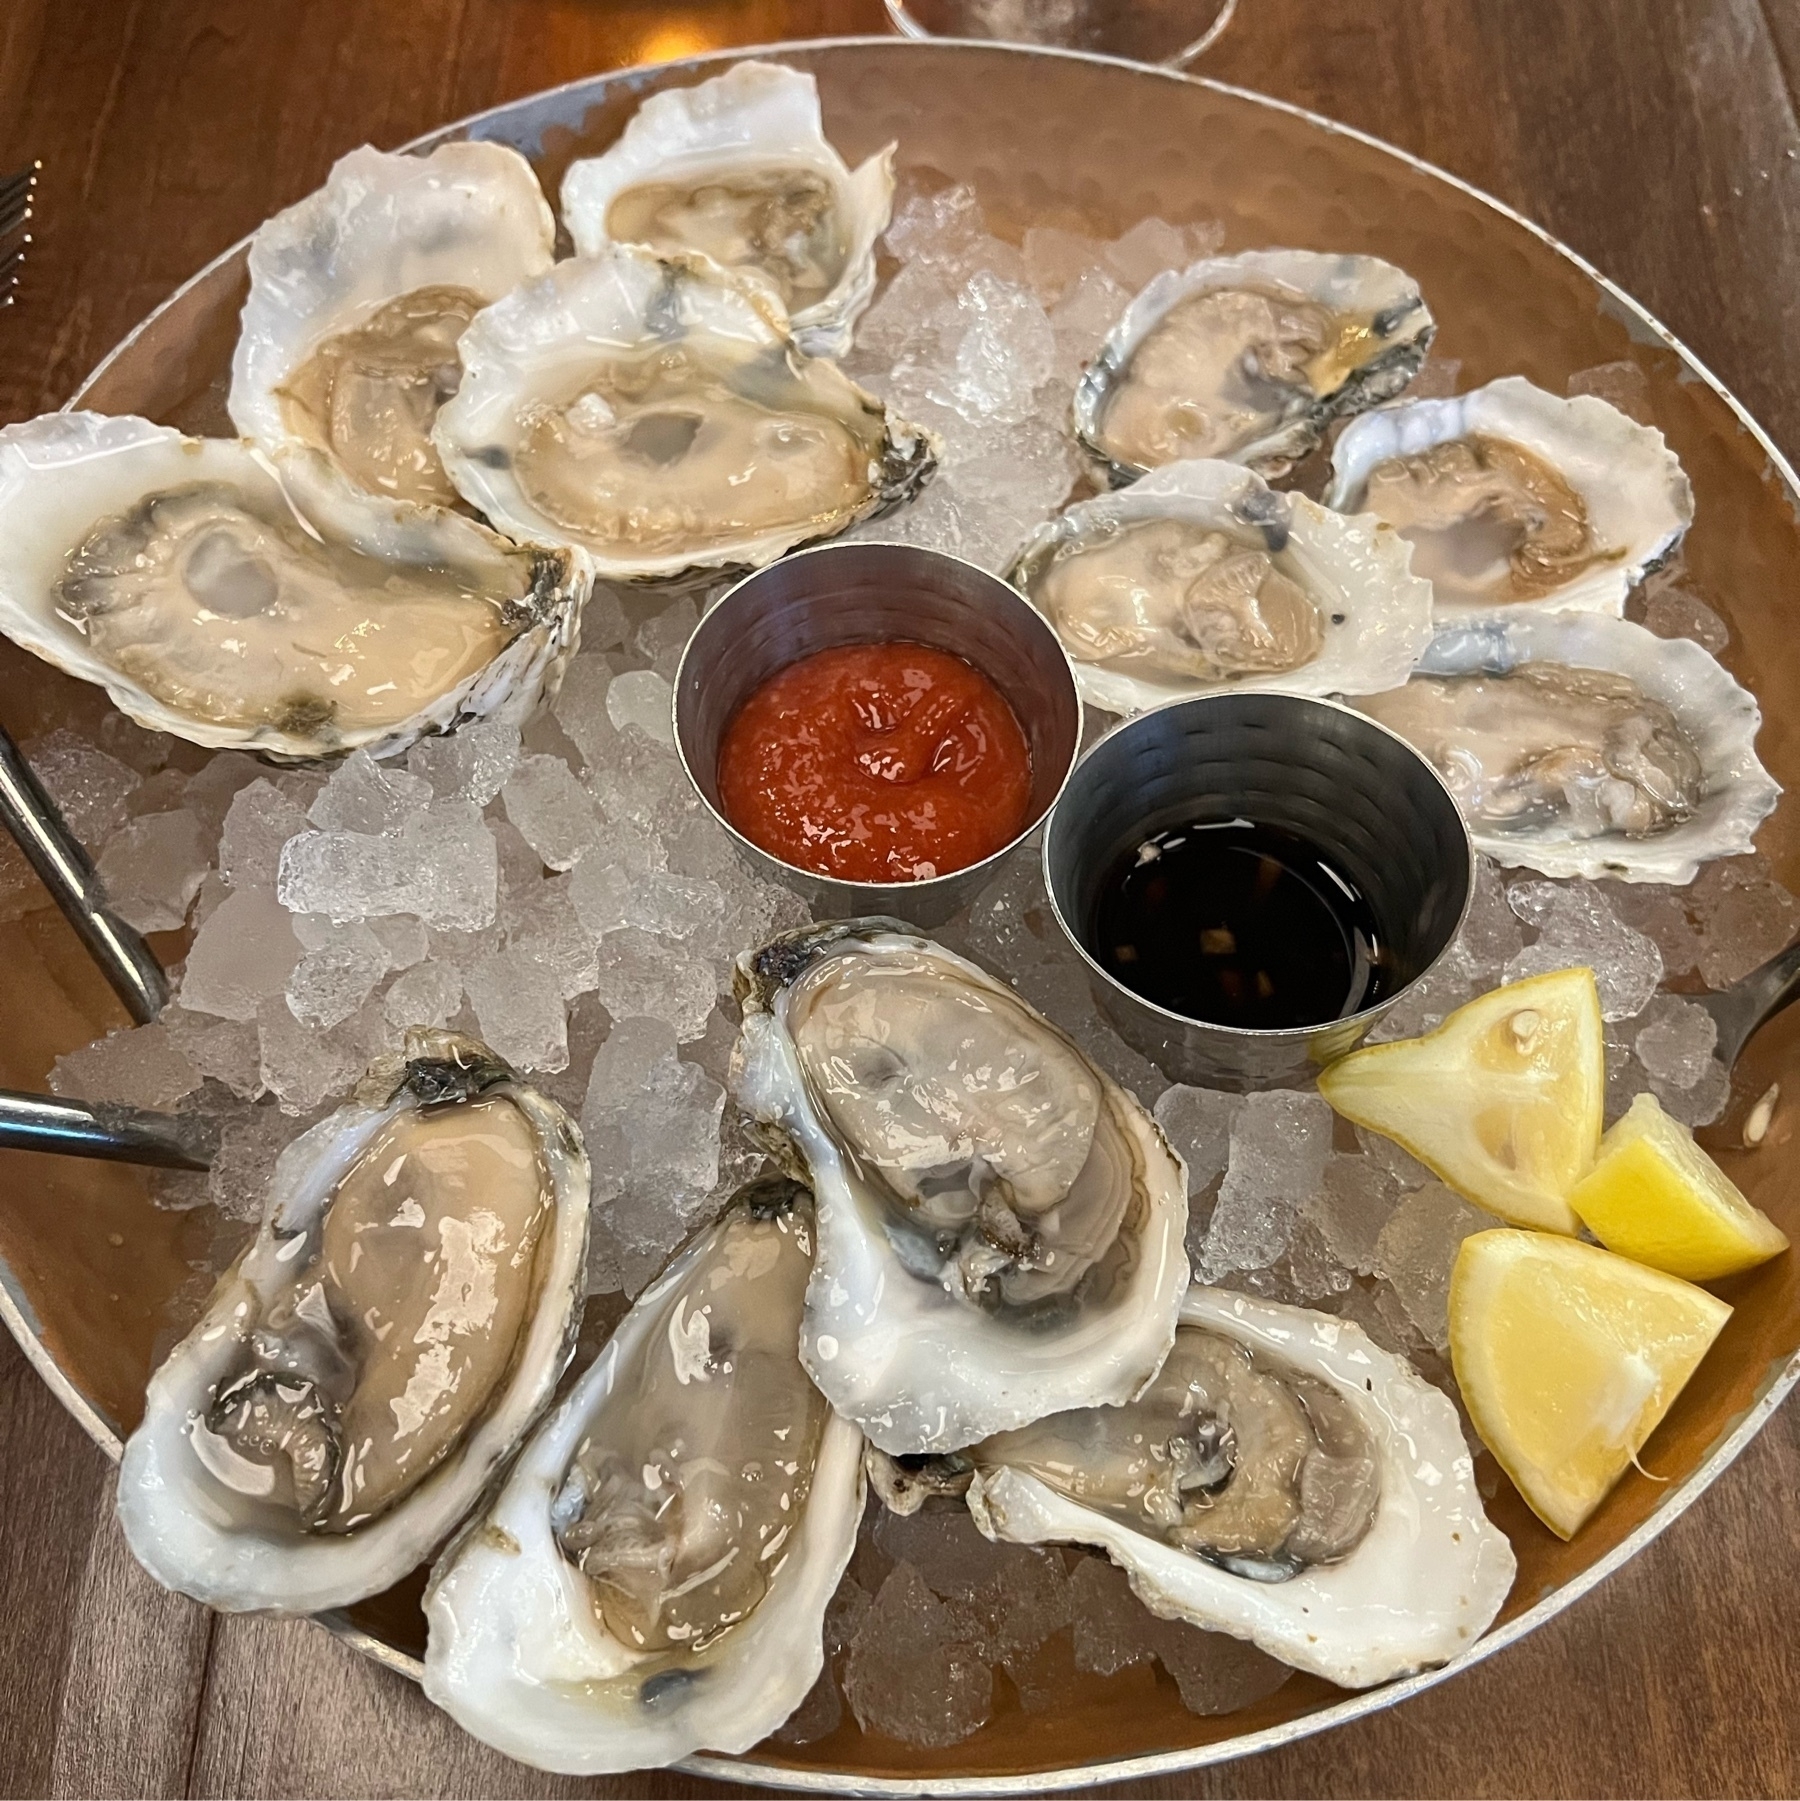 A dozen raw oysters on ice.